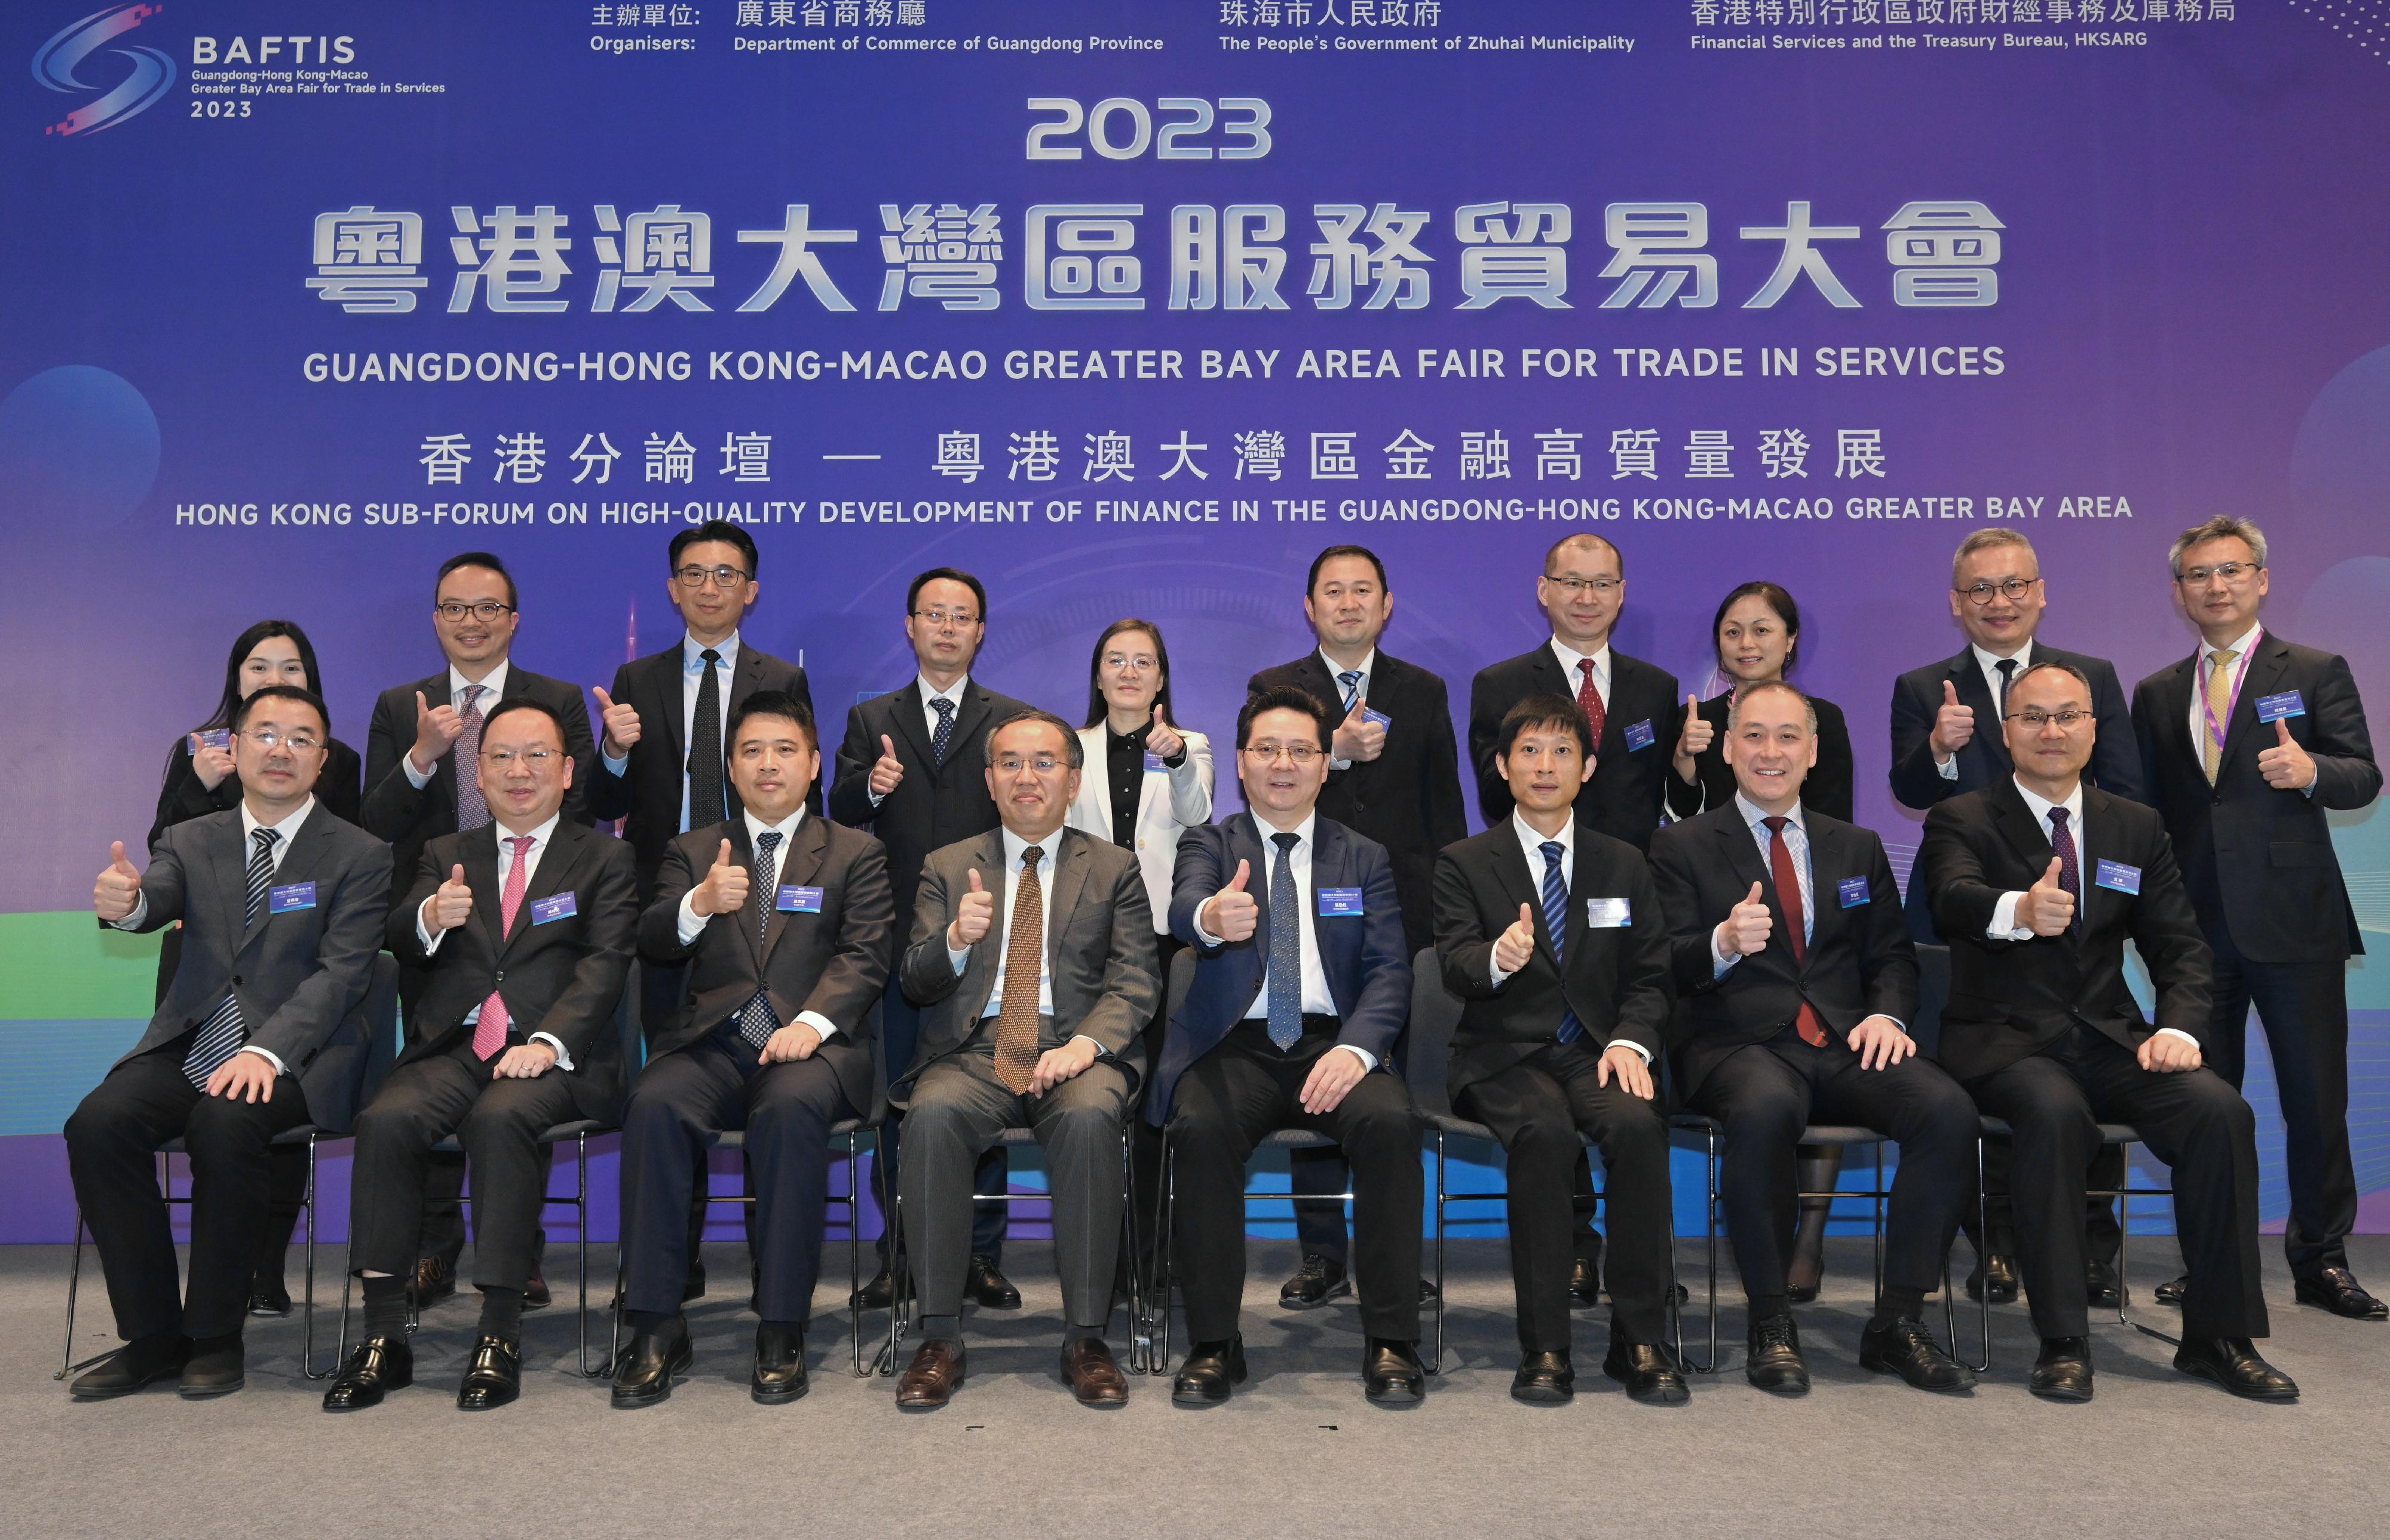 The Financial Services and the Treasury Bureau, the Department of Commerce of Guangdong Province and the People's Government of Zhuhai Municipality today (December 7) jointly held the Hong Kong Sub-forum of the 2023 Guangdong-Hong Kong-Macao Greater Bay Area Fair for Trade in Services. Photo shows the Secretary for Financial Services and the Treasury, Mr Christopher Hui (fourth left, front row); the Director-General of the Department of Commerce of Guangdong Province, Mr Zhang Jinsong (fourth right, front row); the Mayor of the Zhuhai Municipal Government, Mr Huang Zhihao (third left, front row); and the Deputy Director-General of the Department of Economic Affairs of the Liaison Office of the Central People's Government in the Hong Kong Special Administrative Region, Mr Tan Yabo (third right, front row), with other participants at the Sub-forum.